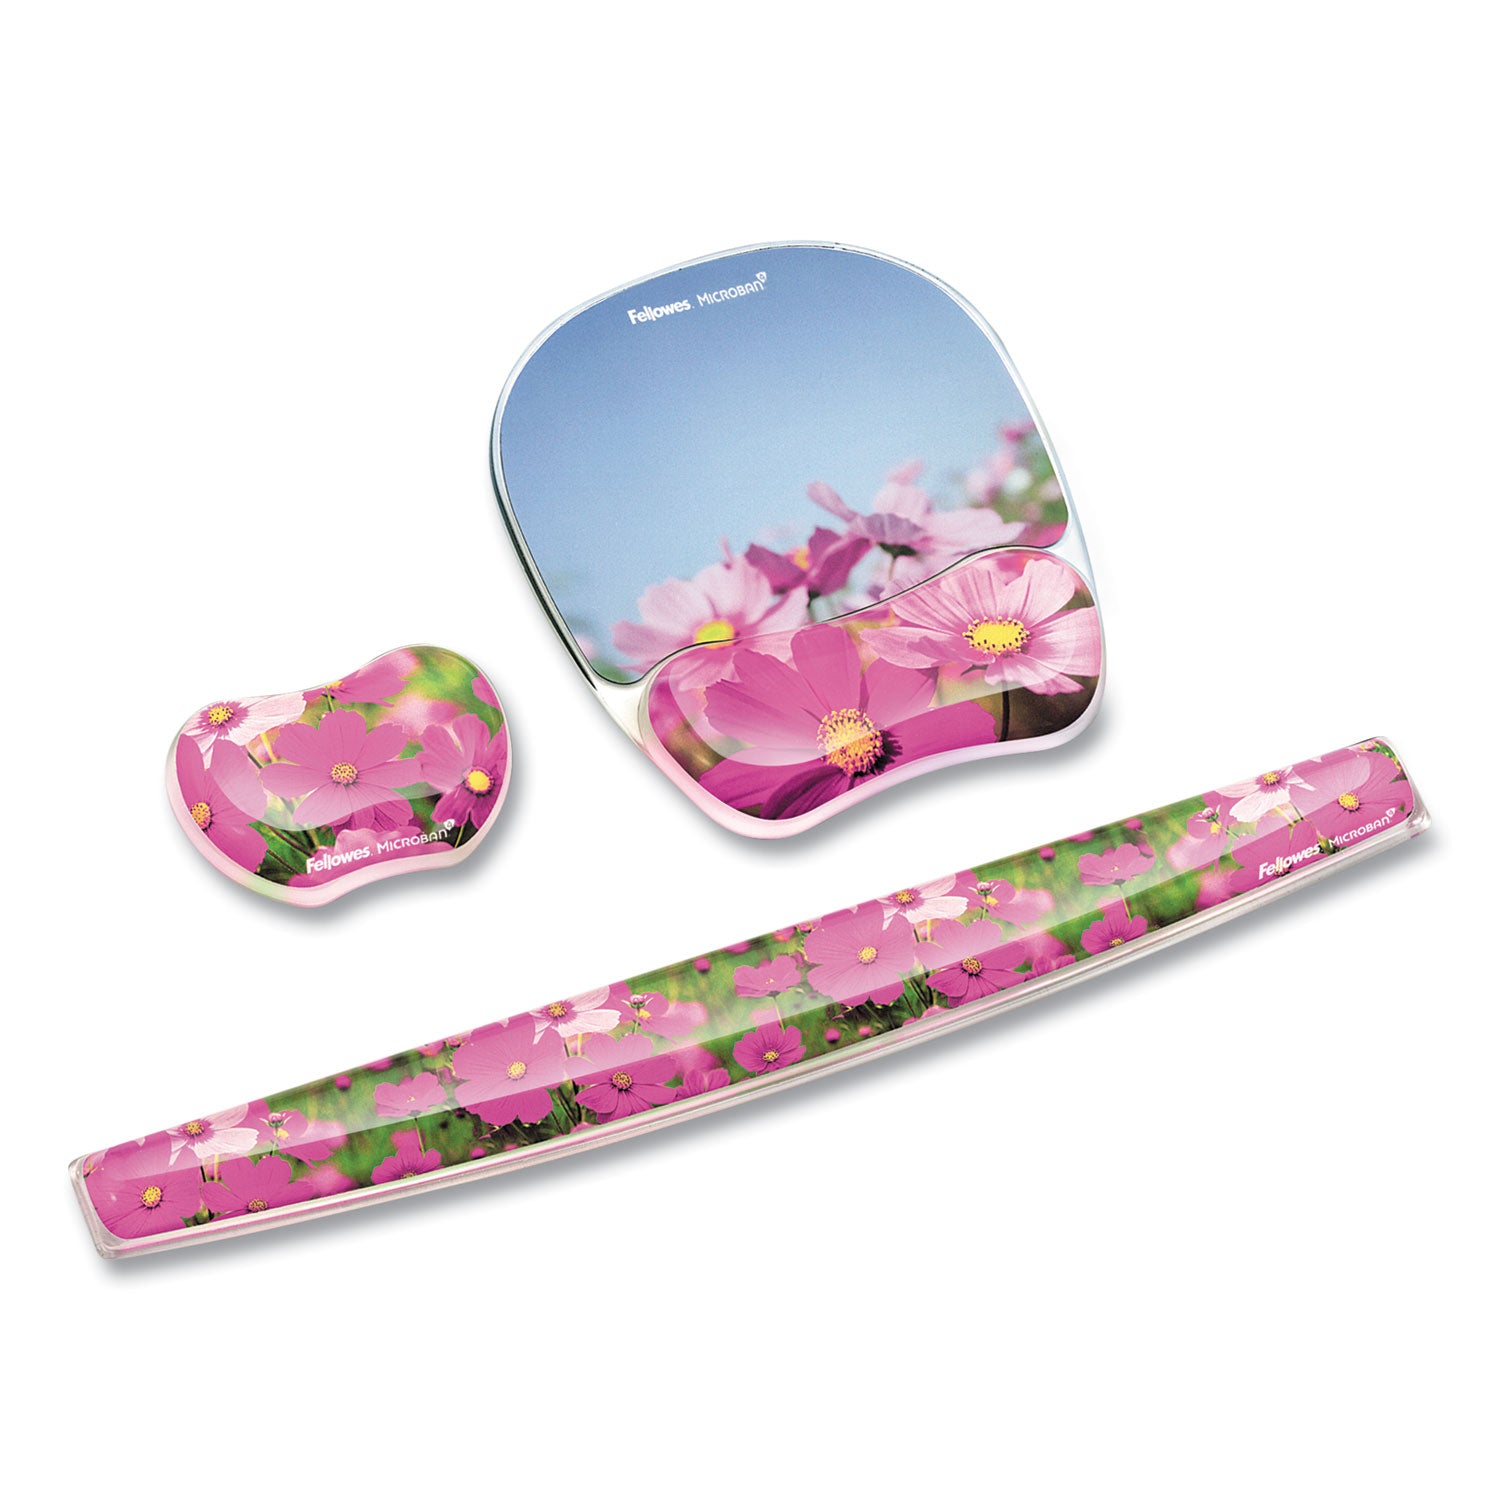 Photo Gel Keyboard Wrist Rest with Microban Protection, 18.56 x 2.31, Pink Flowers Design - 